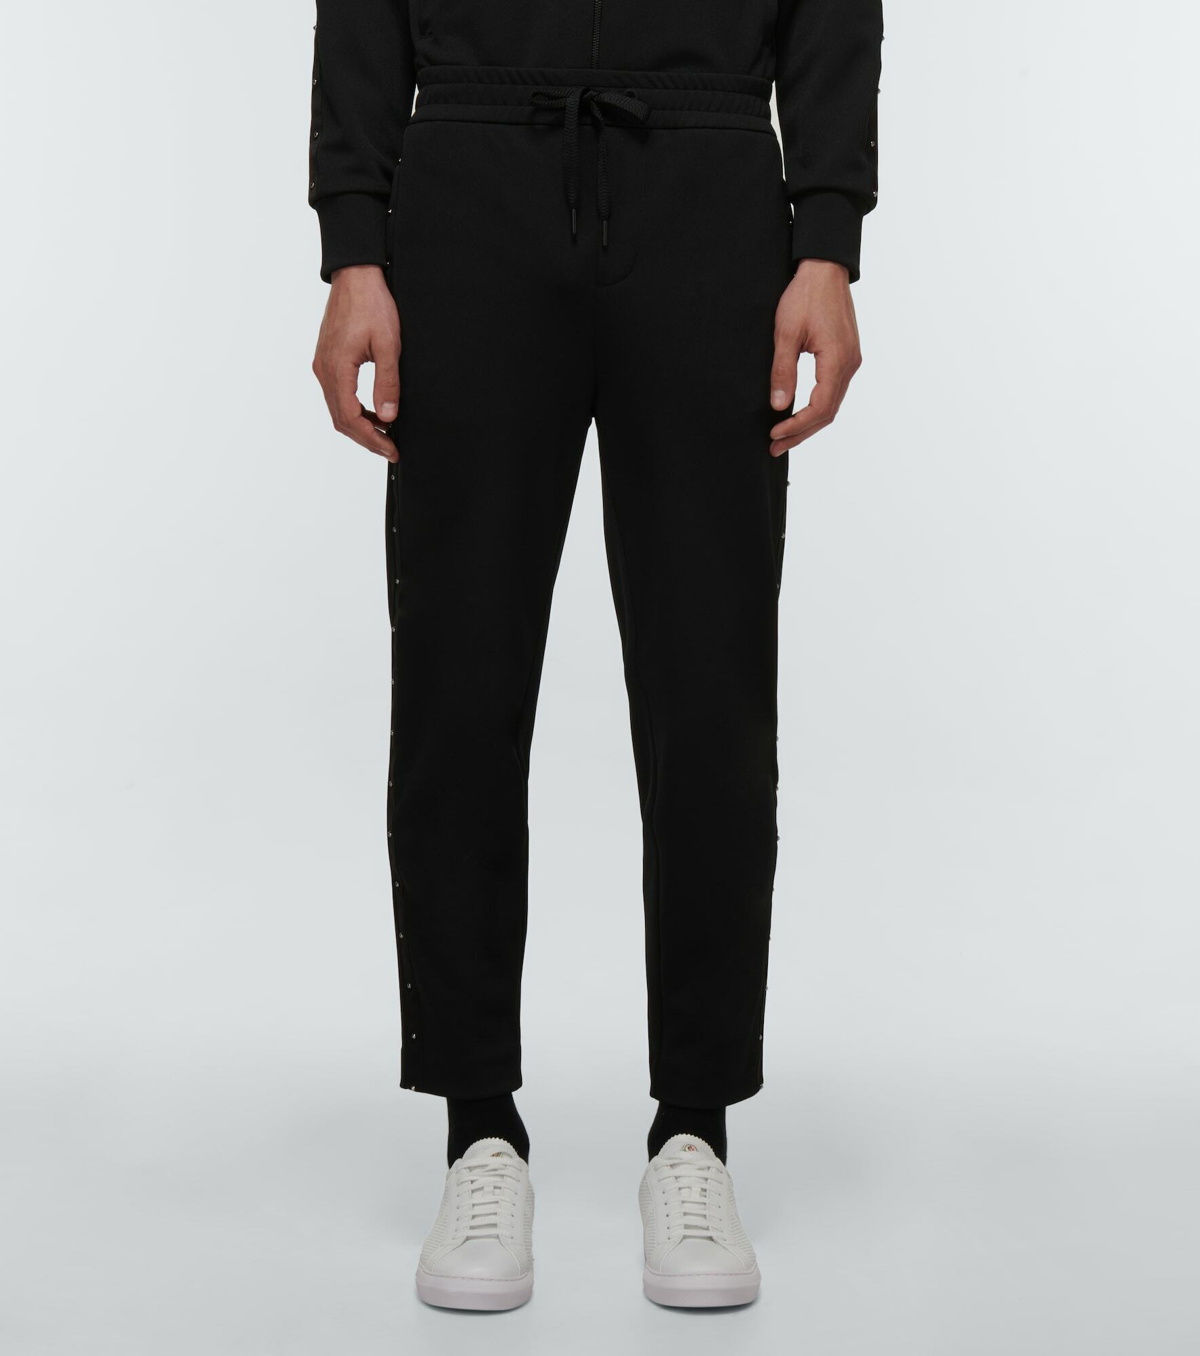 Moncler - Tapered sweatpants Moncler